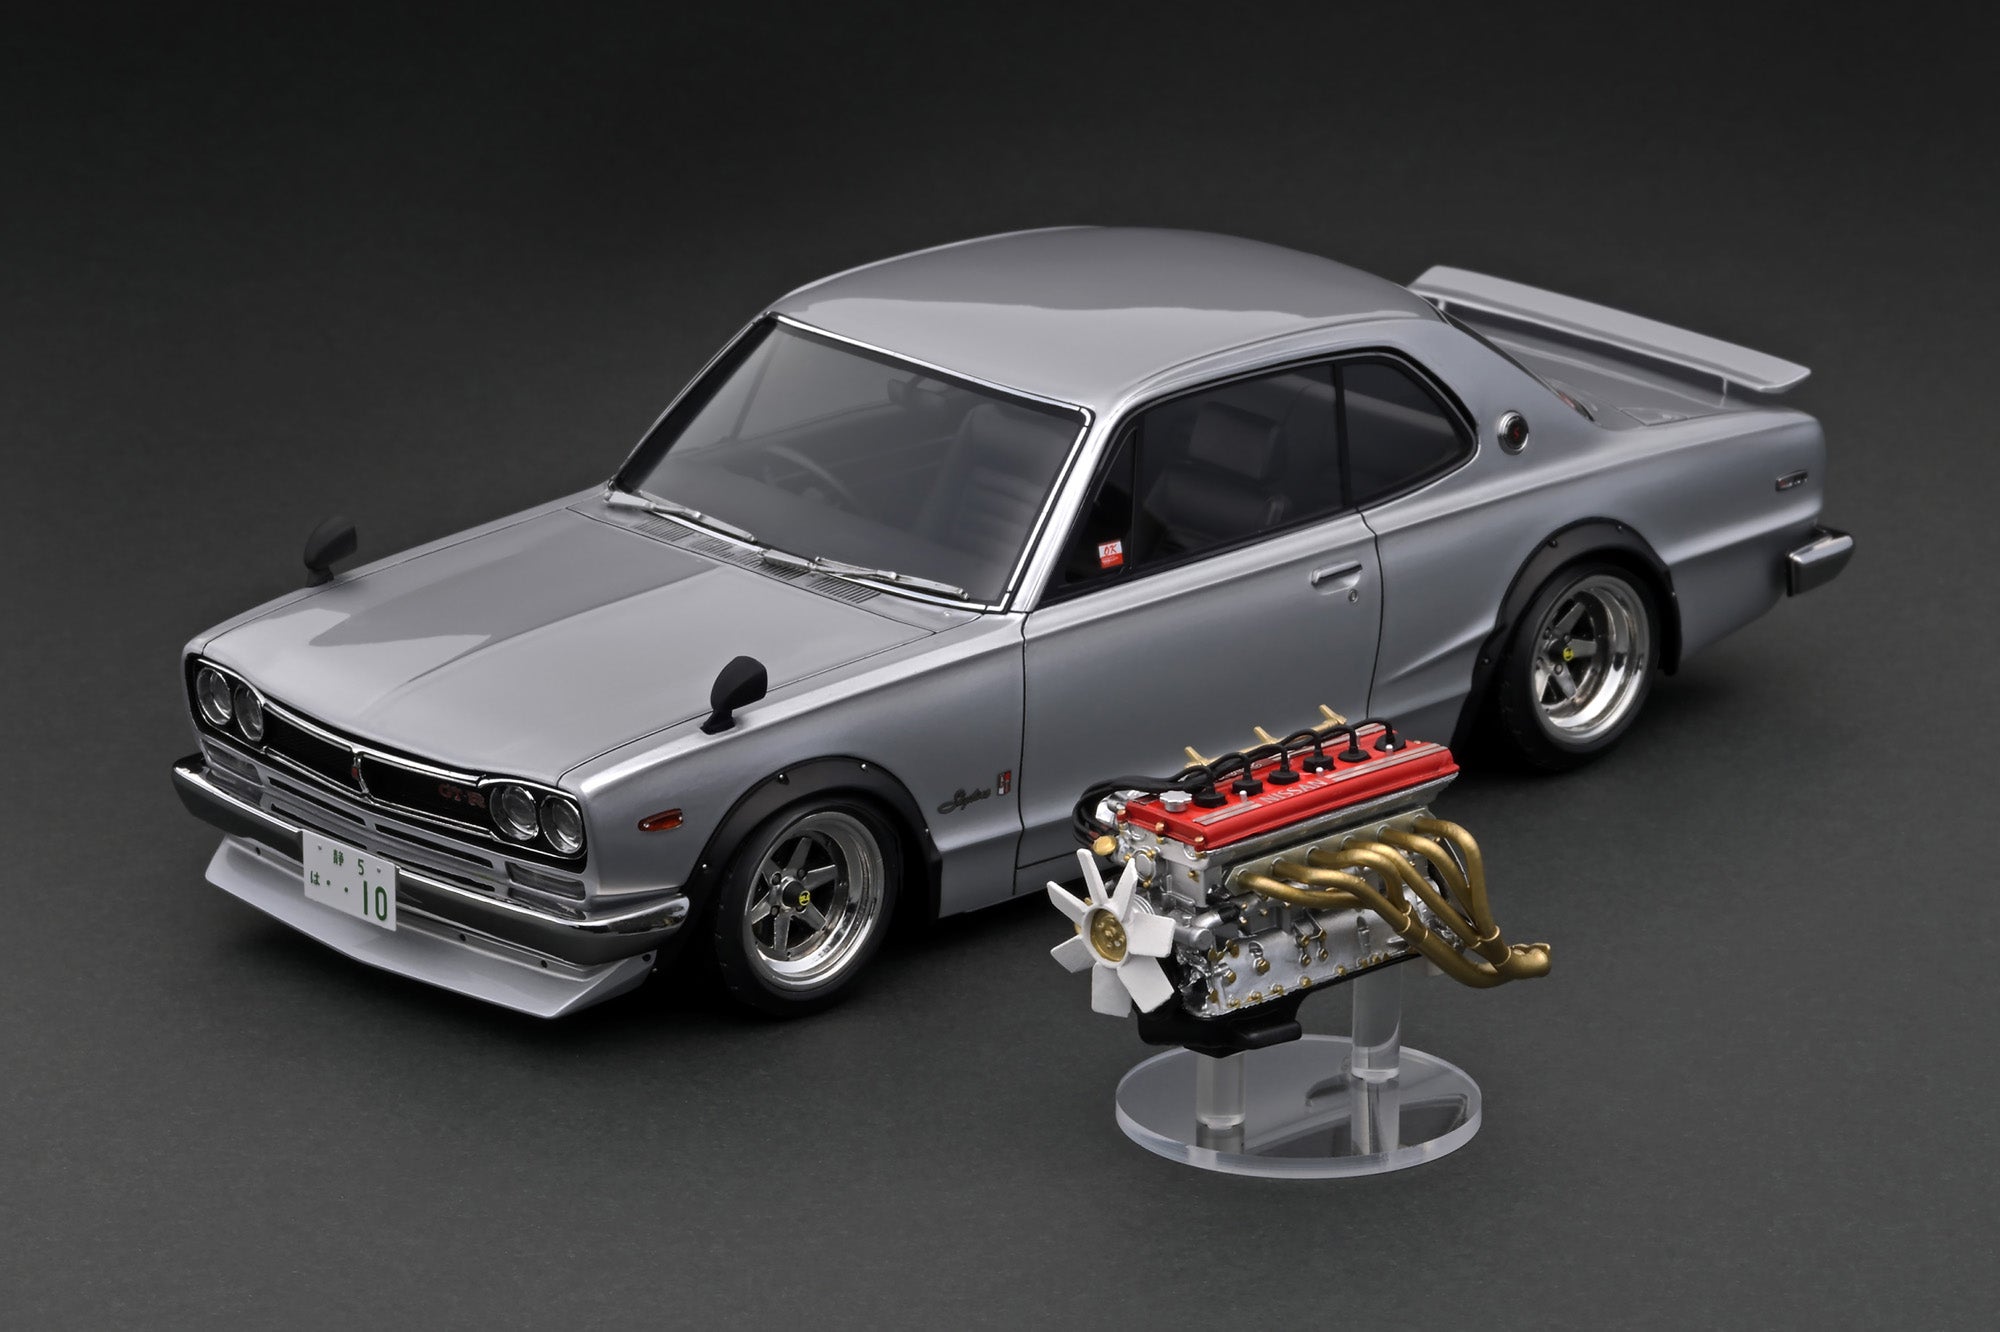 1:18 Scale, Diecast Cars, Collectibles